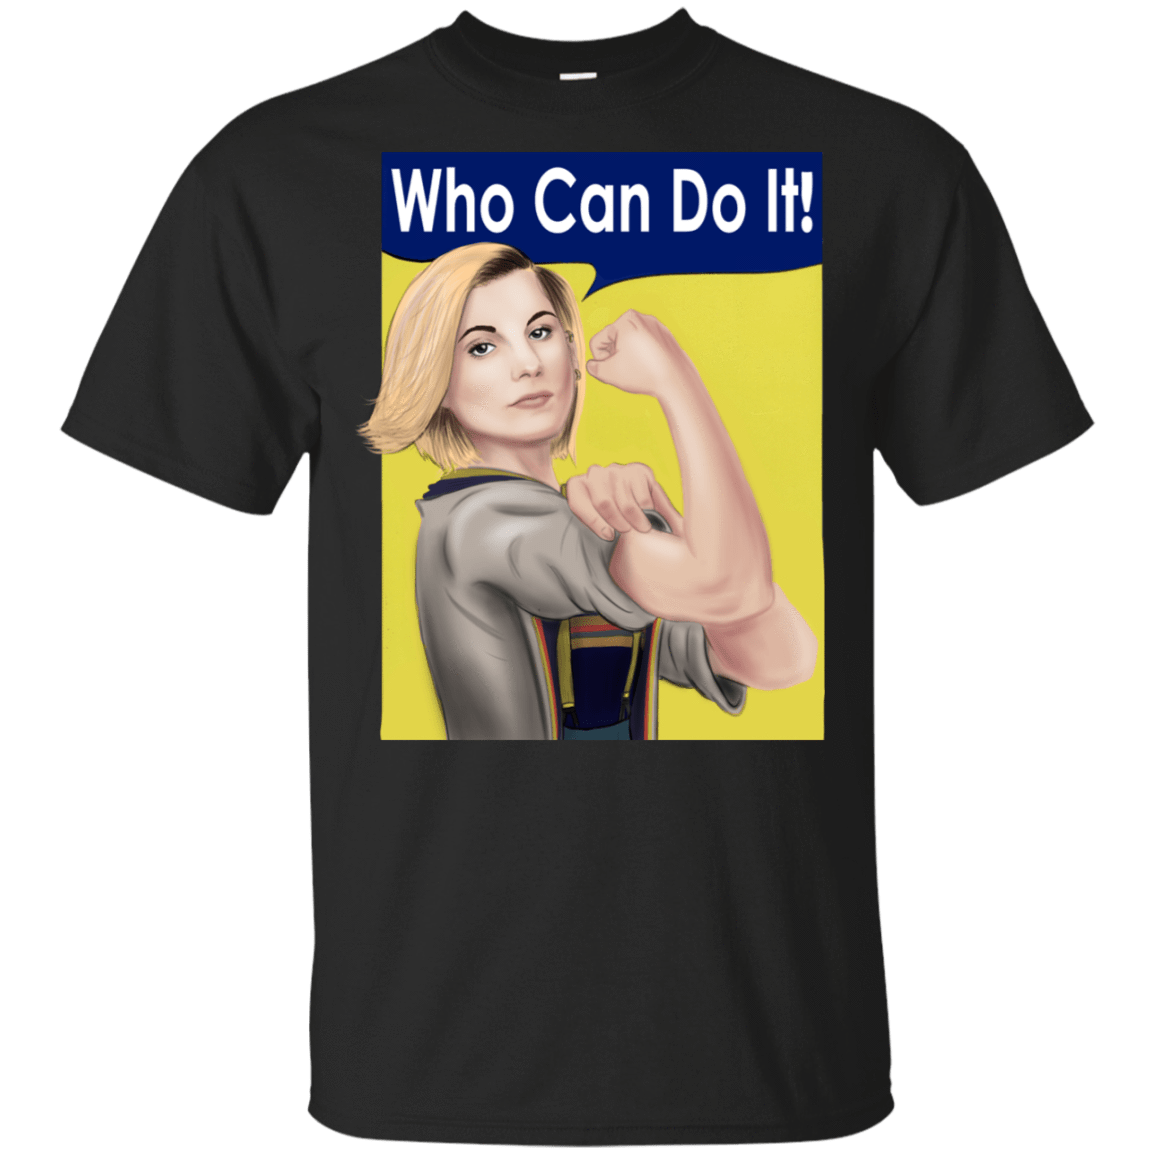 T-Shirts Black / S Who Can Do It T-Shirt